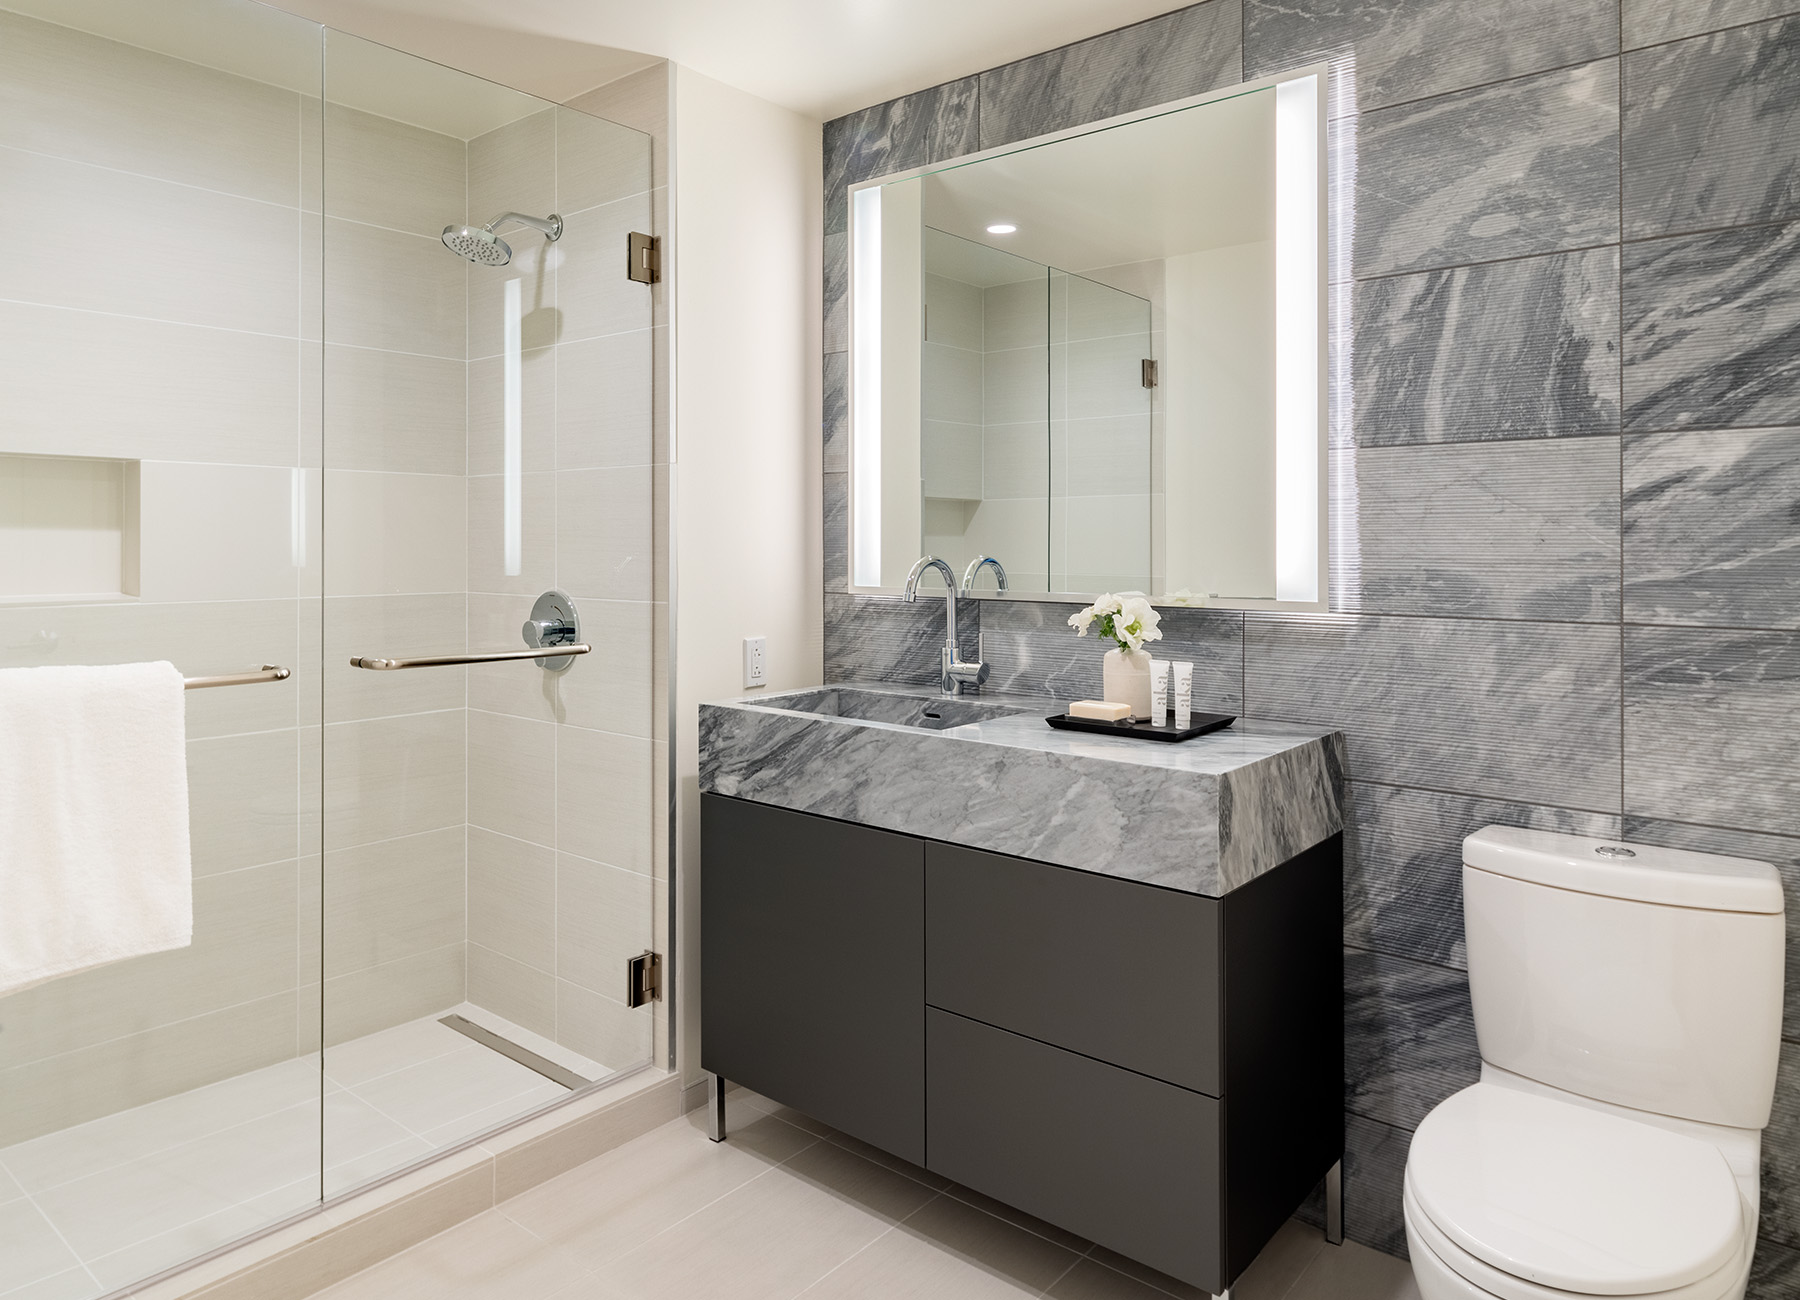 AKA West Hollywood apartment bathroom with dark gray marble sink and white tile shower